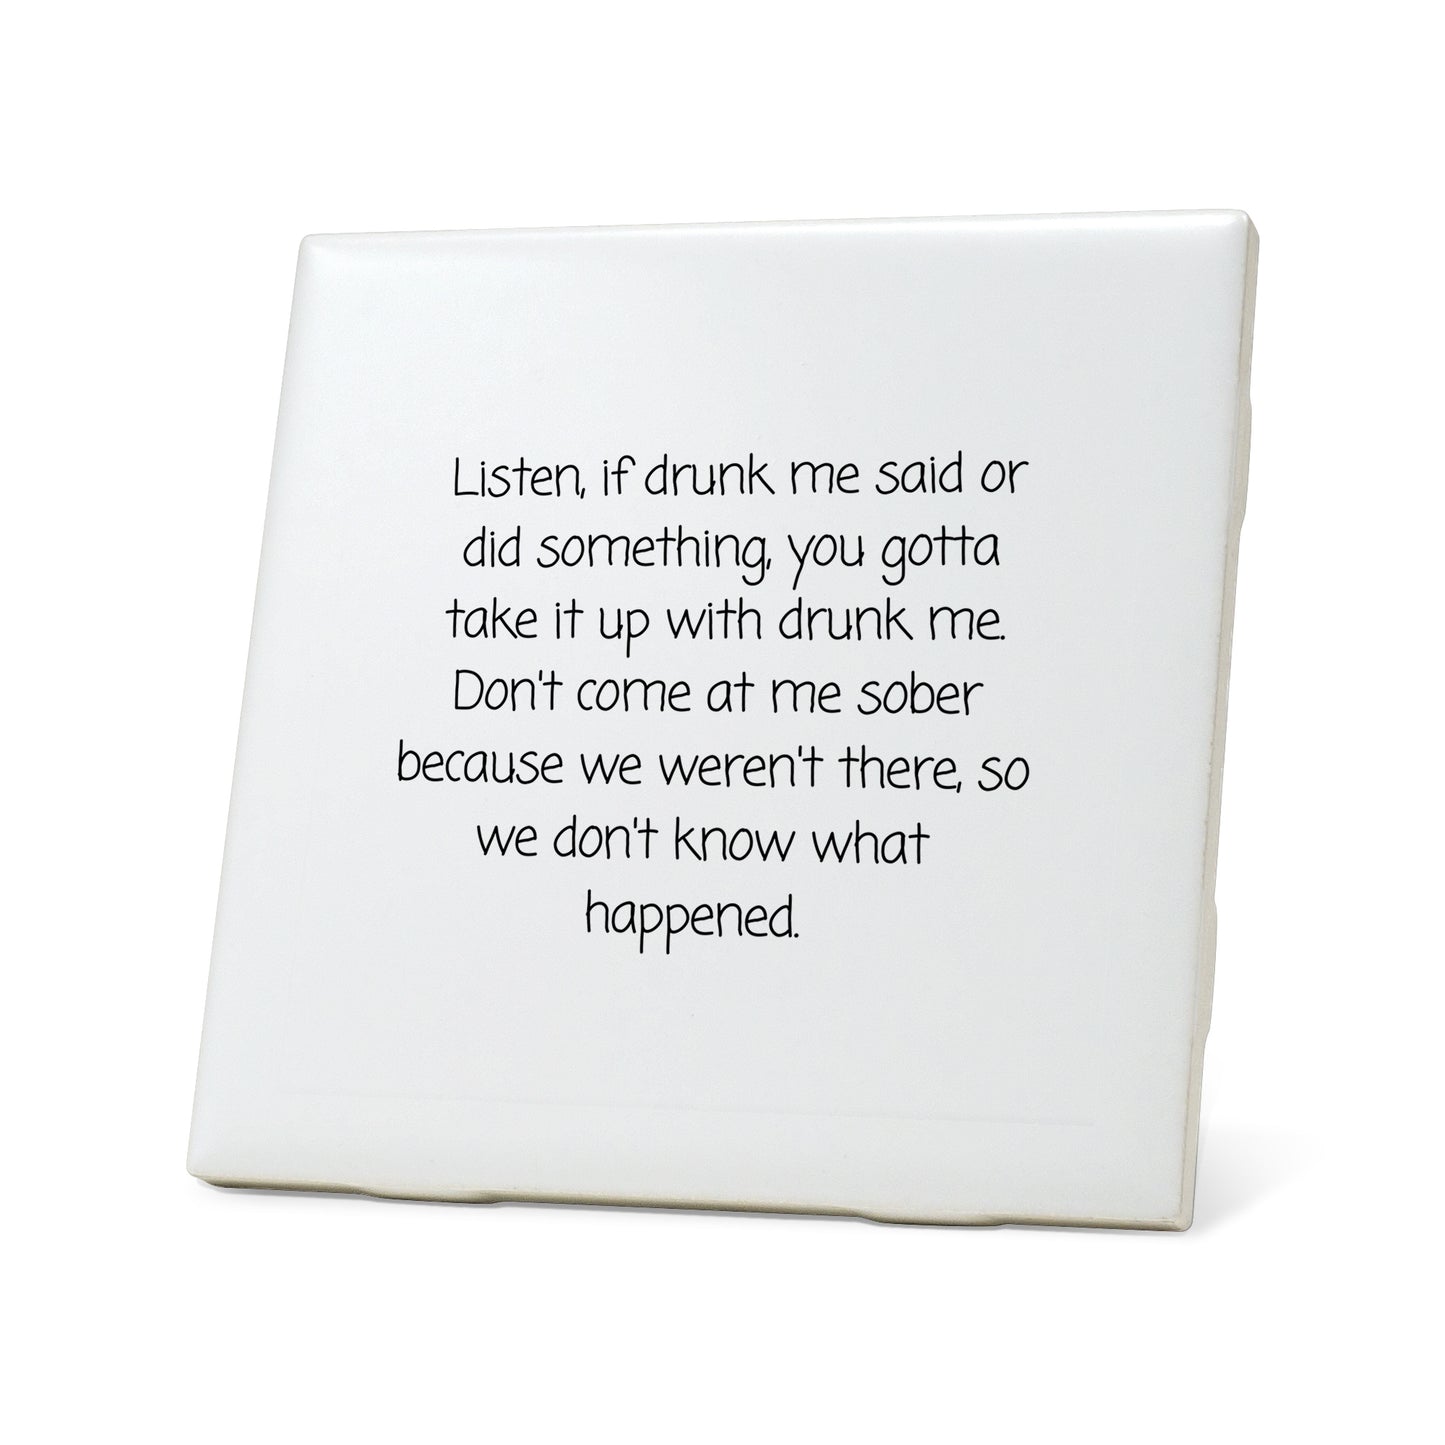 If drunk me said or did Quote Coaster